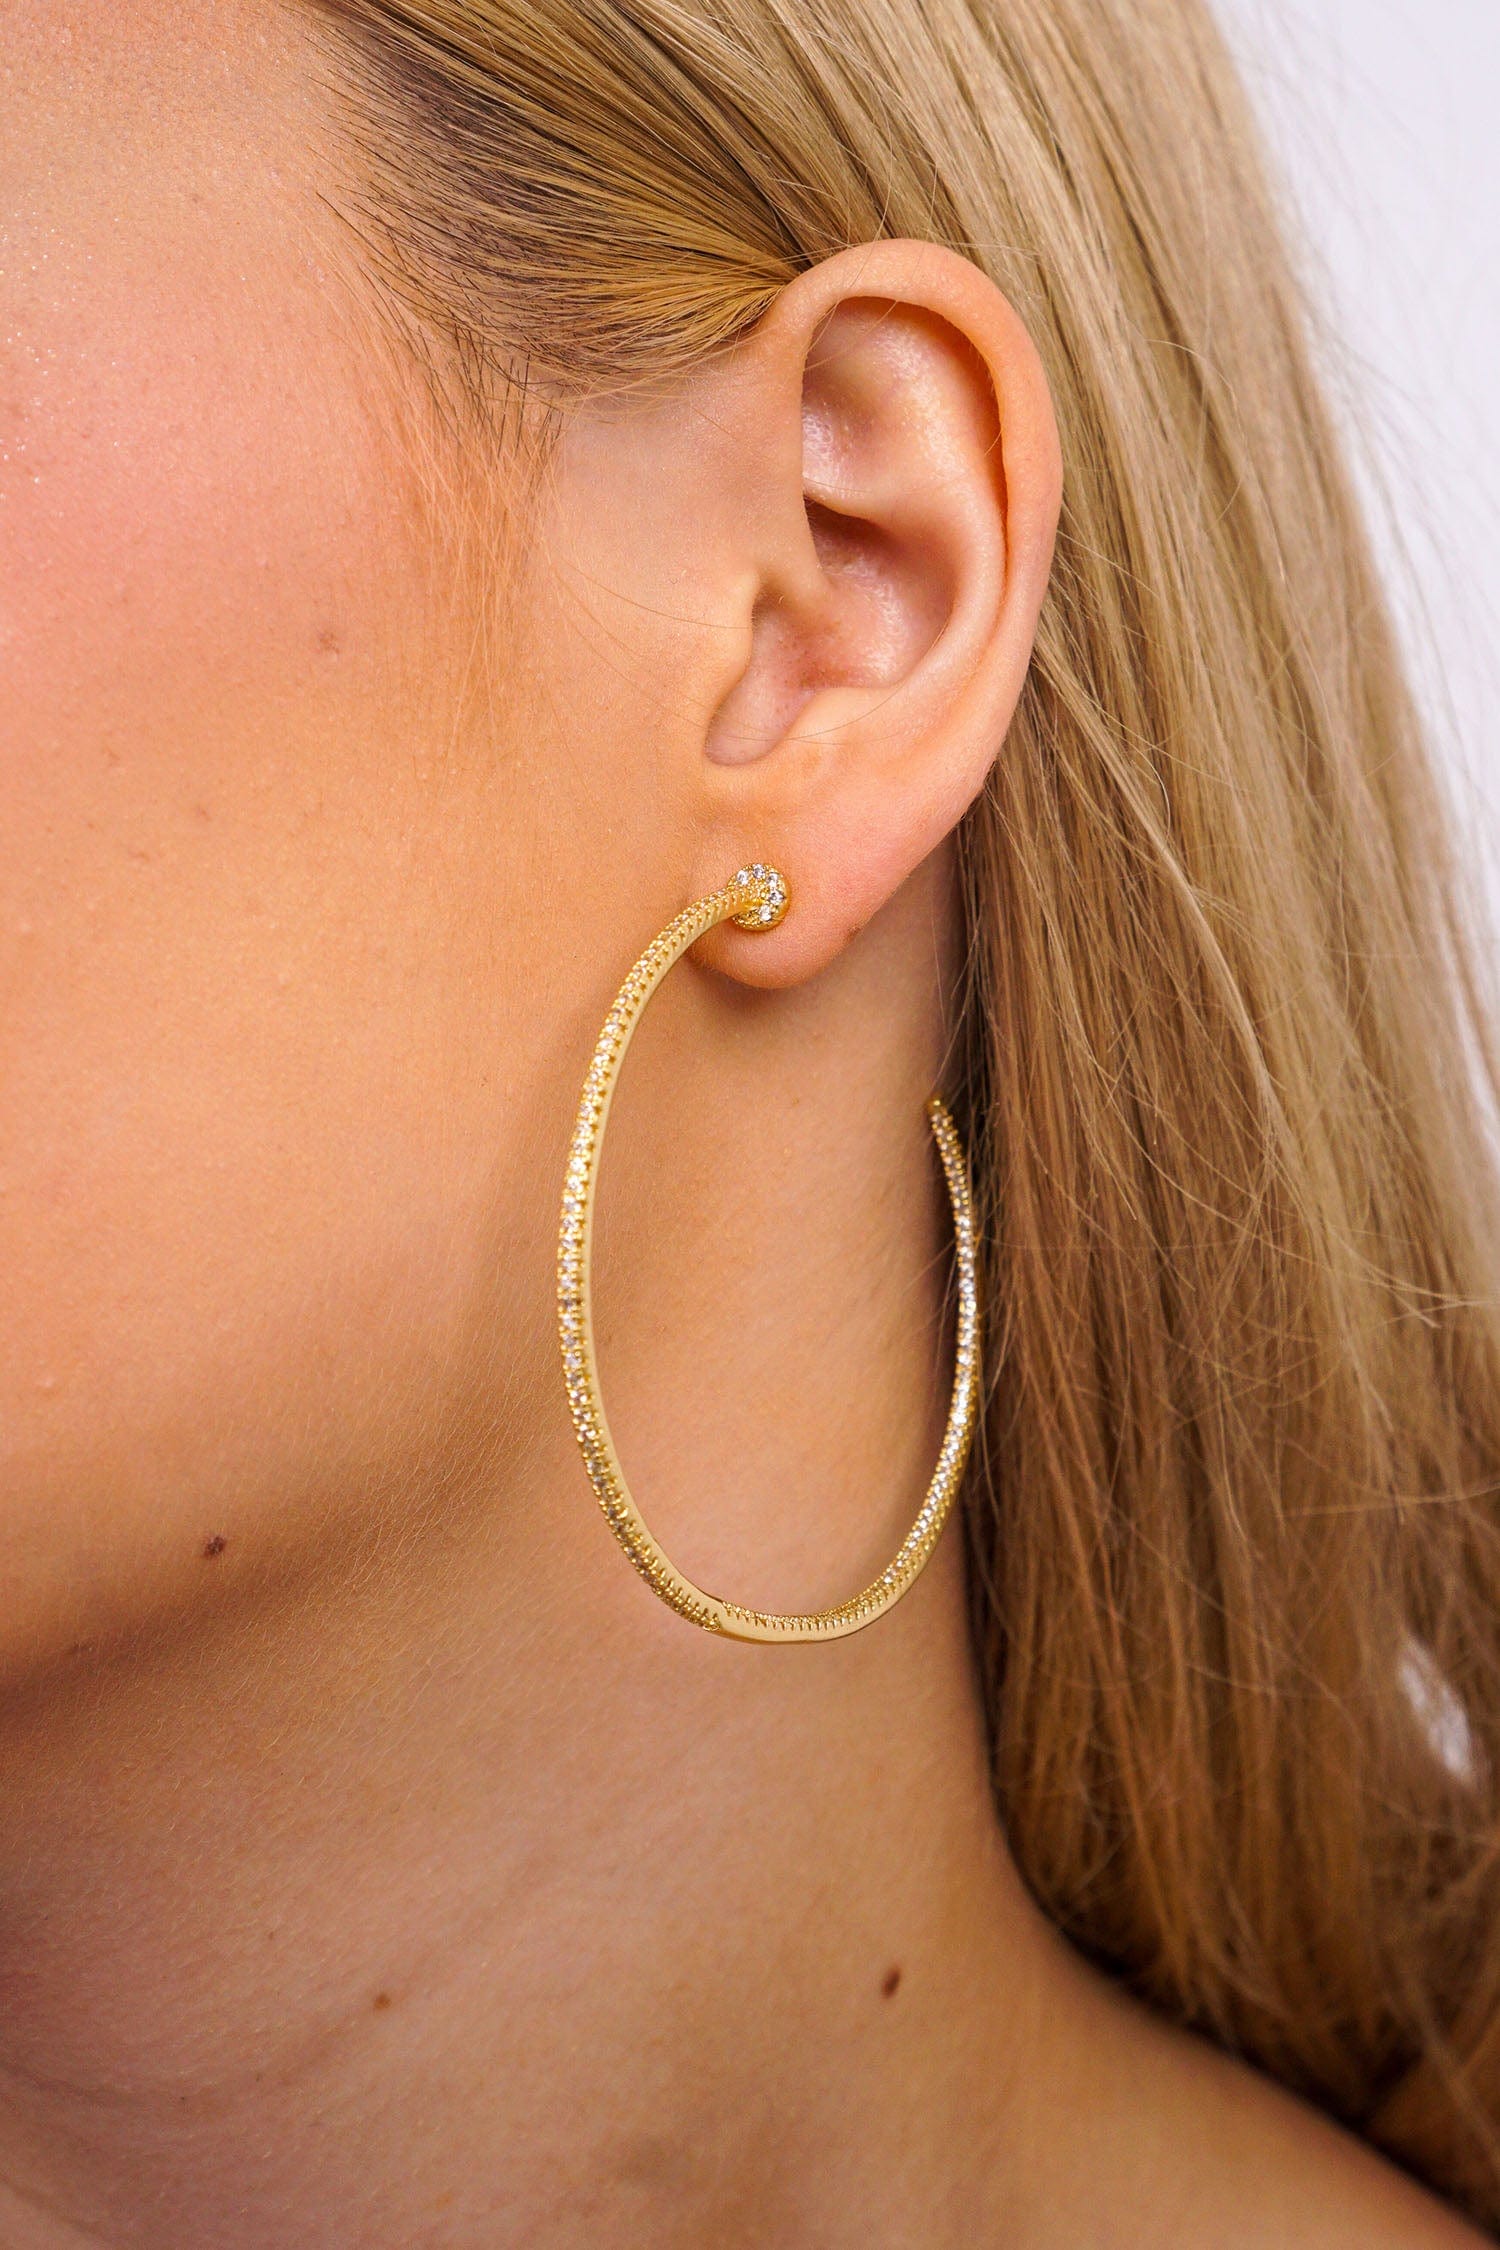 DCD EARRINGS 1 Gold Plated Large CZ Hoops With CZ Outside Front/Inside Back